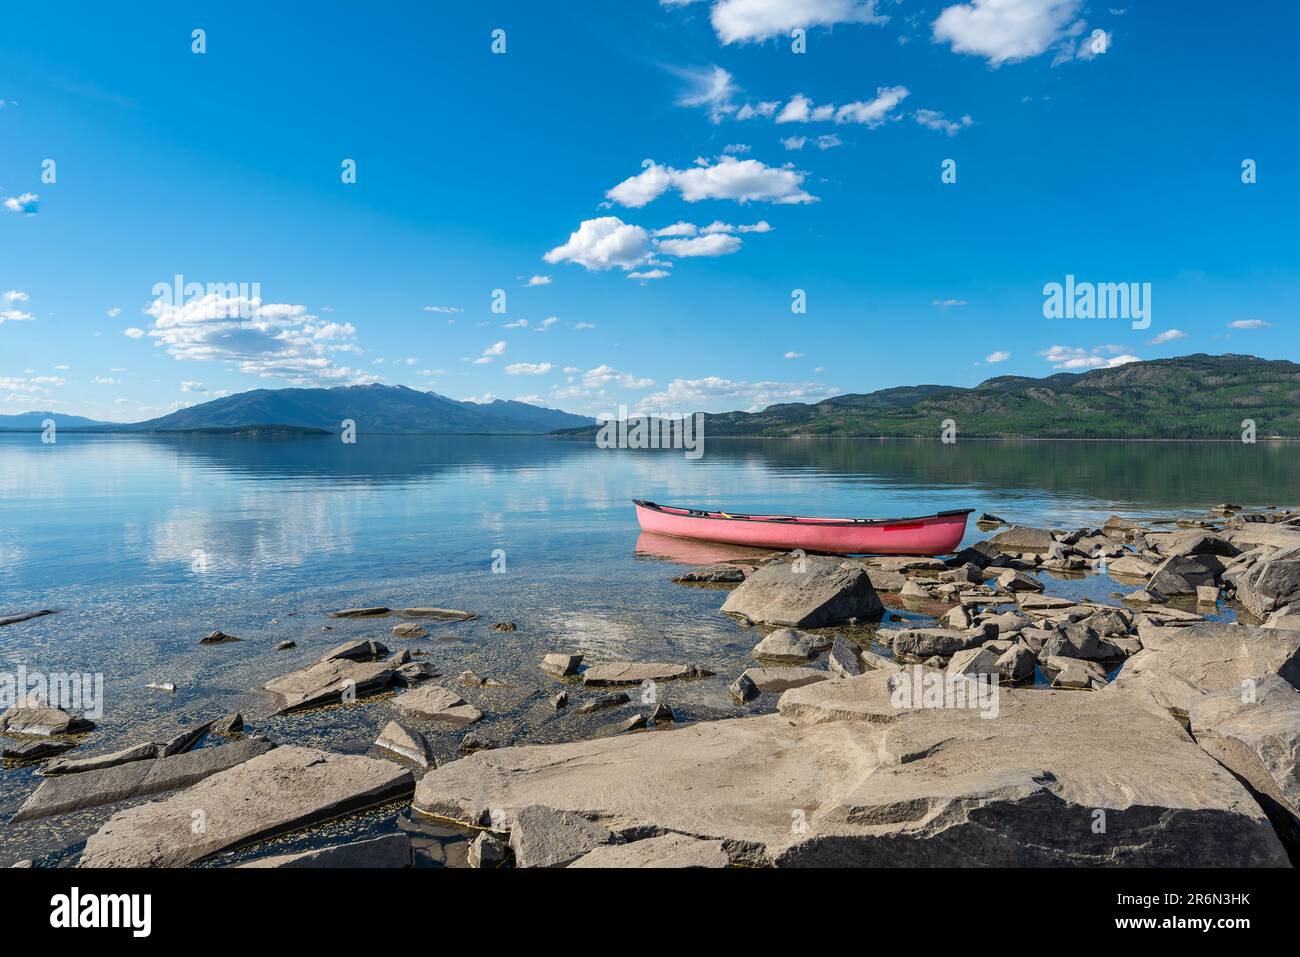 Red canoe sitting aside a rocky lake side on a beautiful blue sky summer day in northern Canada with mountains reflecting in the calm water below. Stock Photo